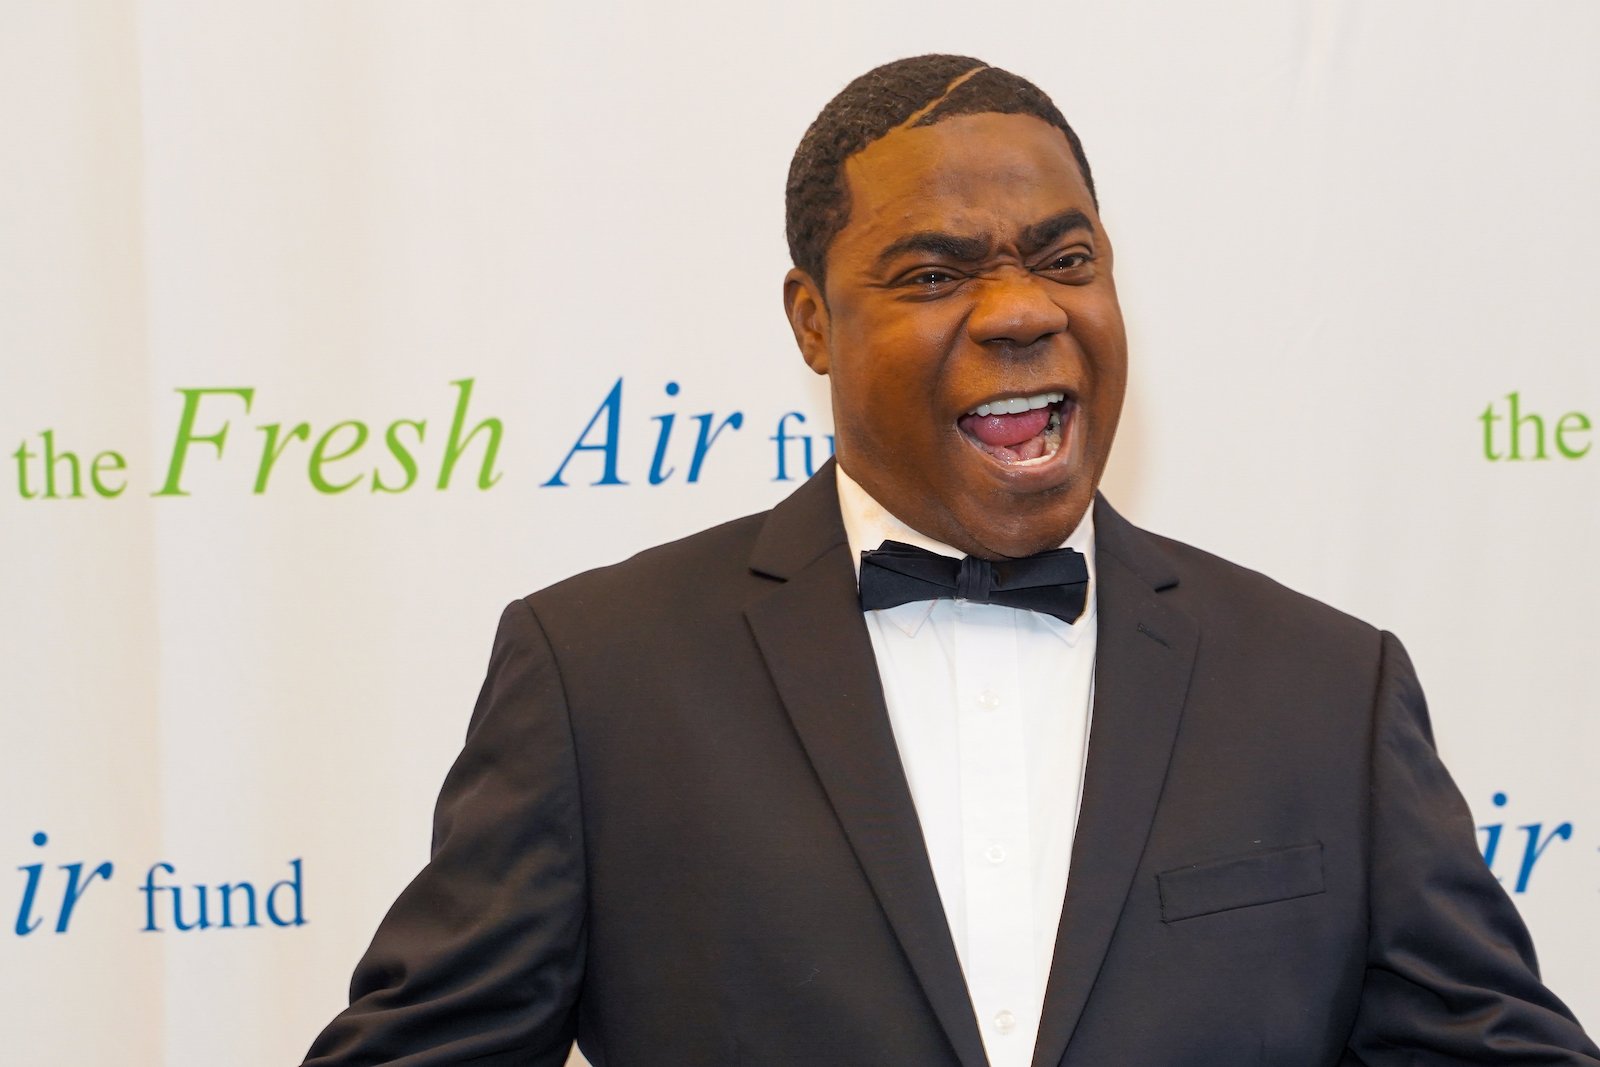 Tracy Morgan Belts out U2’s ‘With Or Without You’ While Waiting for a Flight